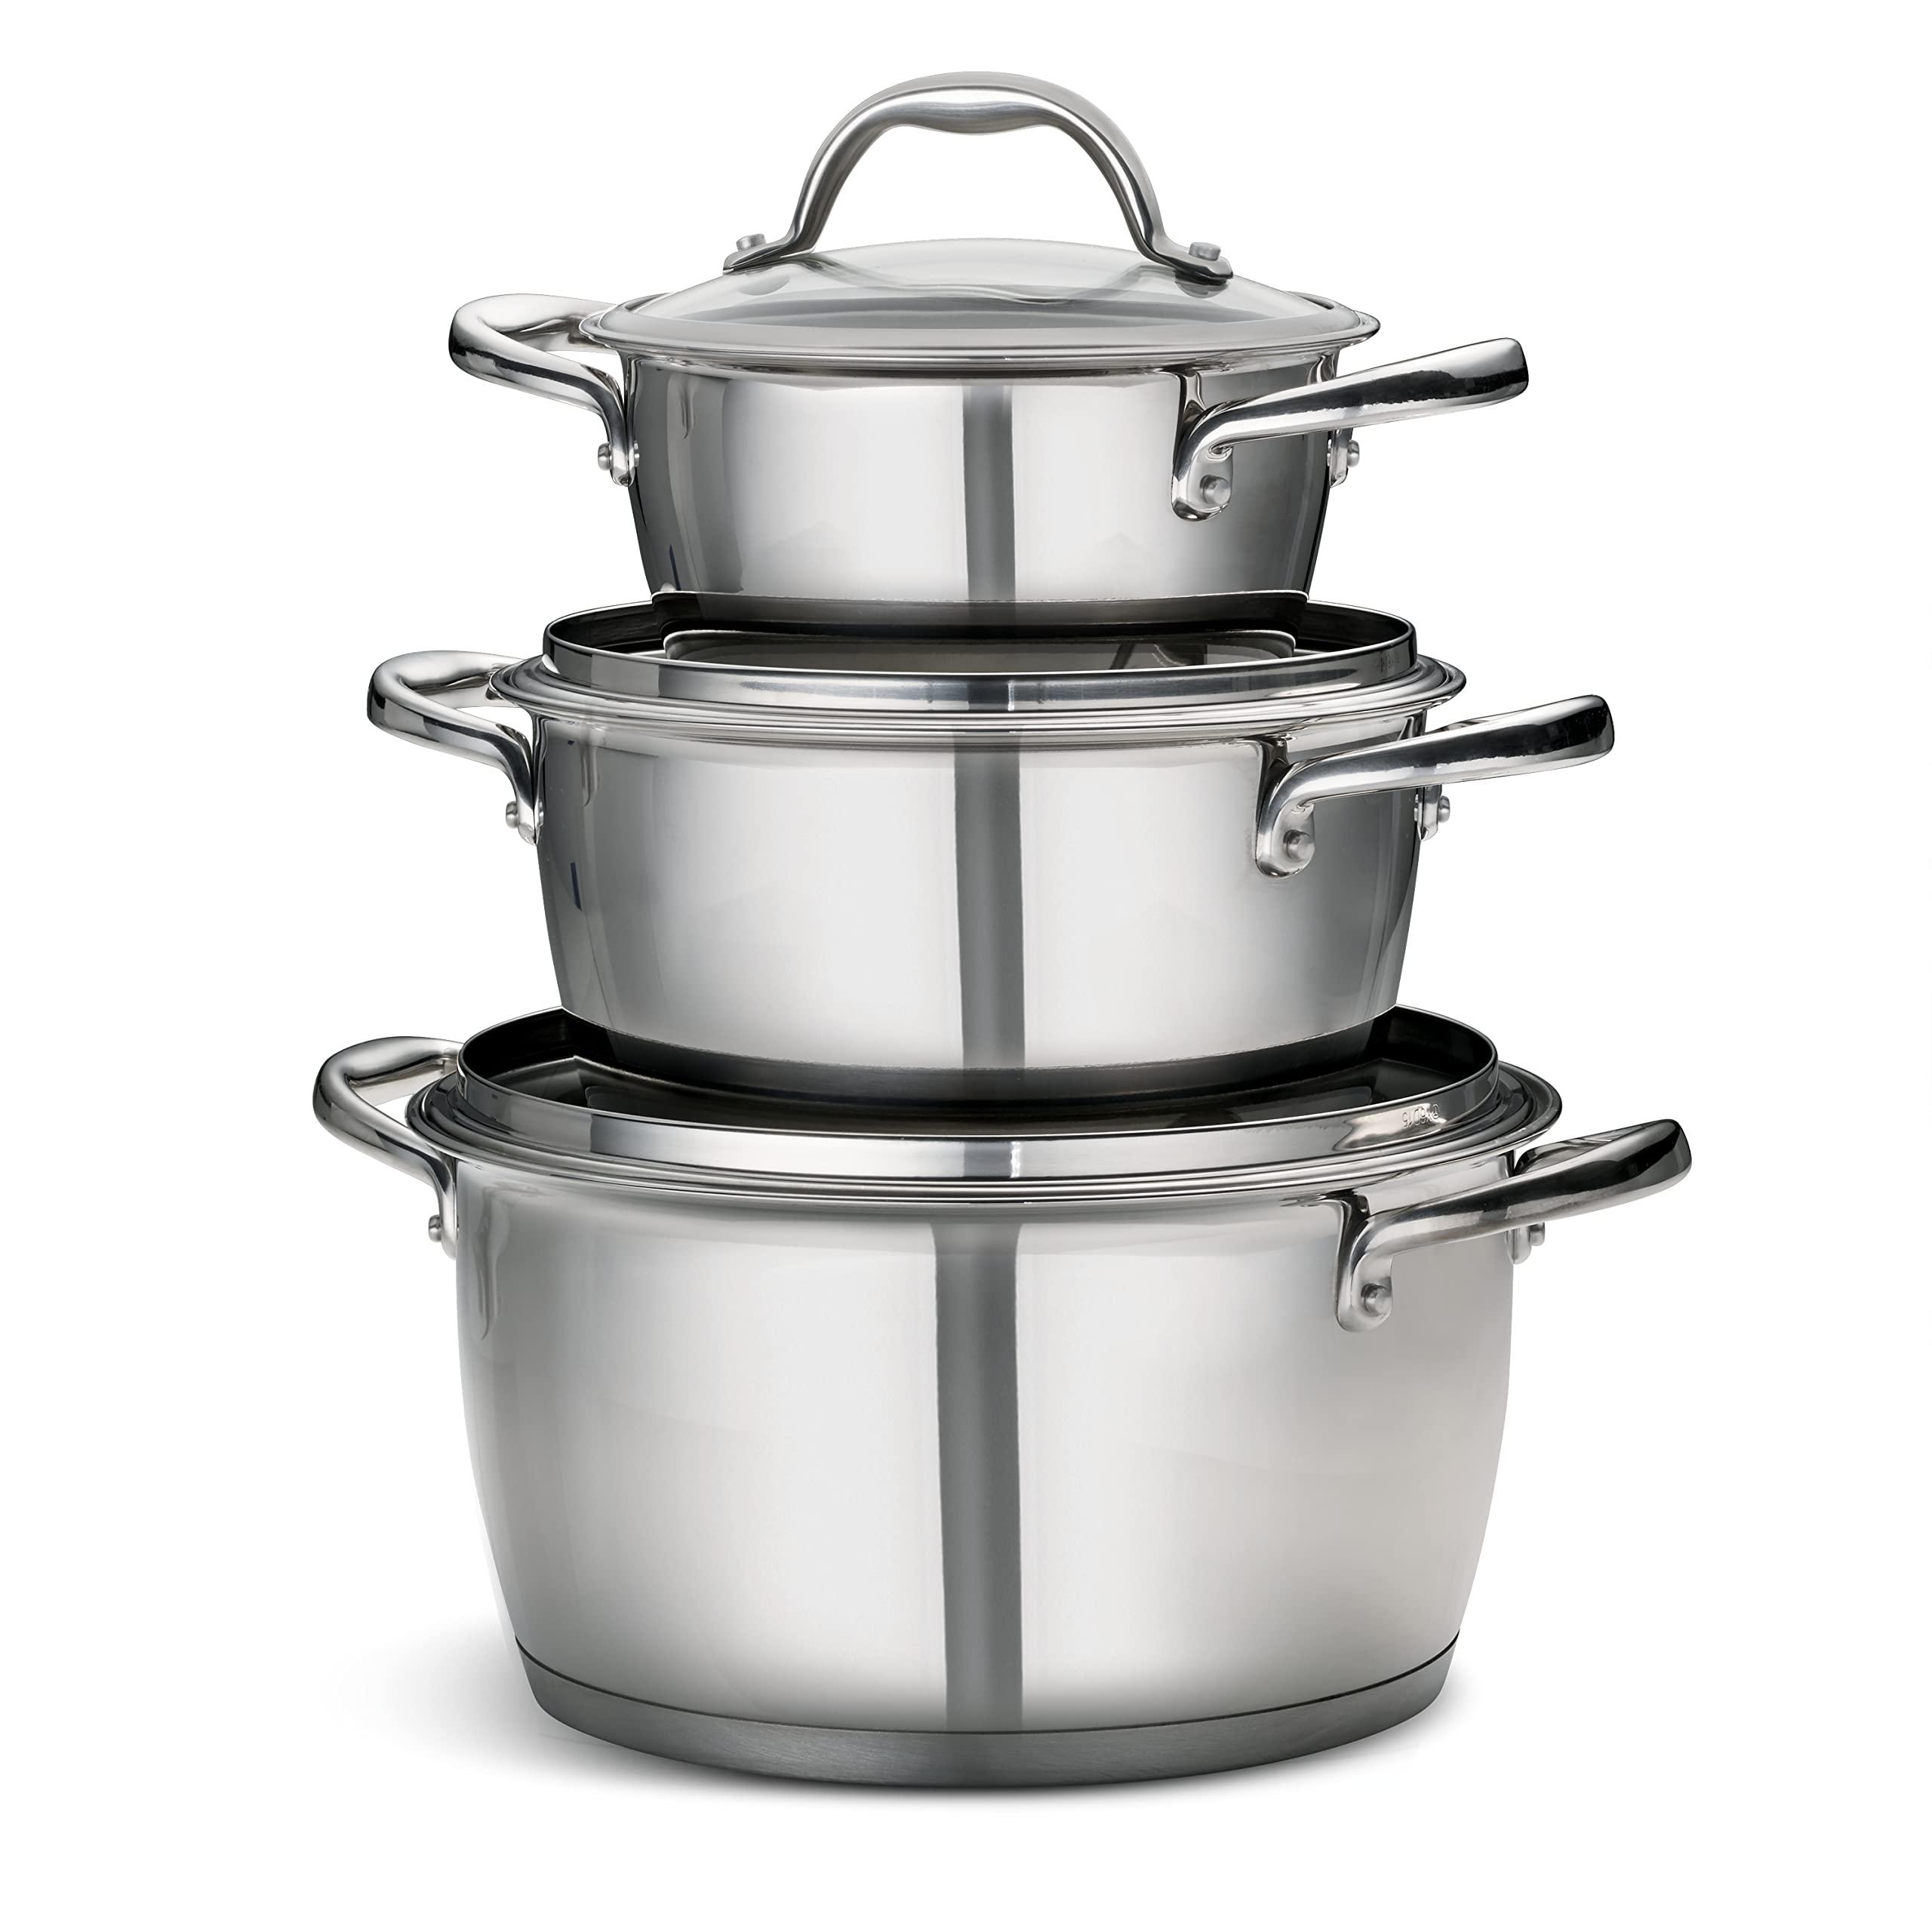 Tramontina tramontina 6 pc stainless steel stackable cookware set